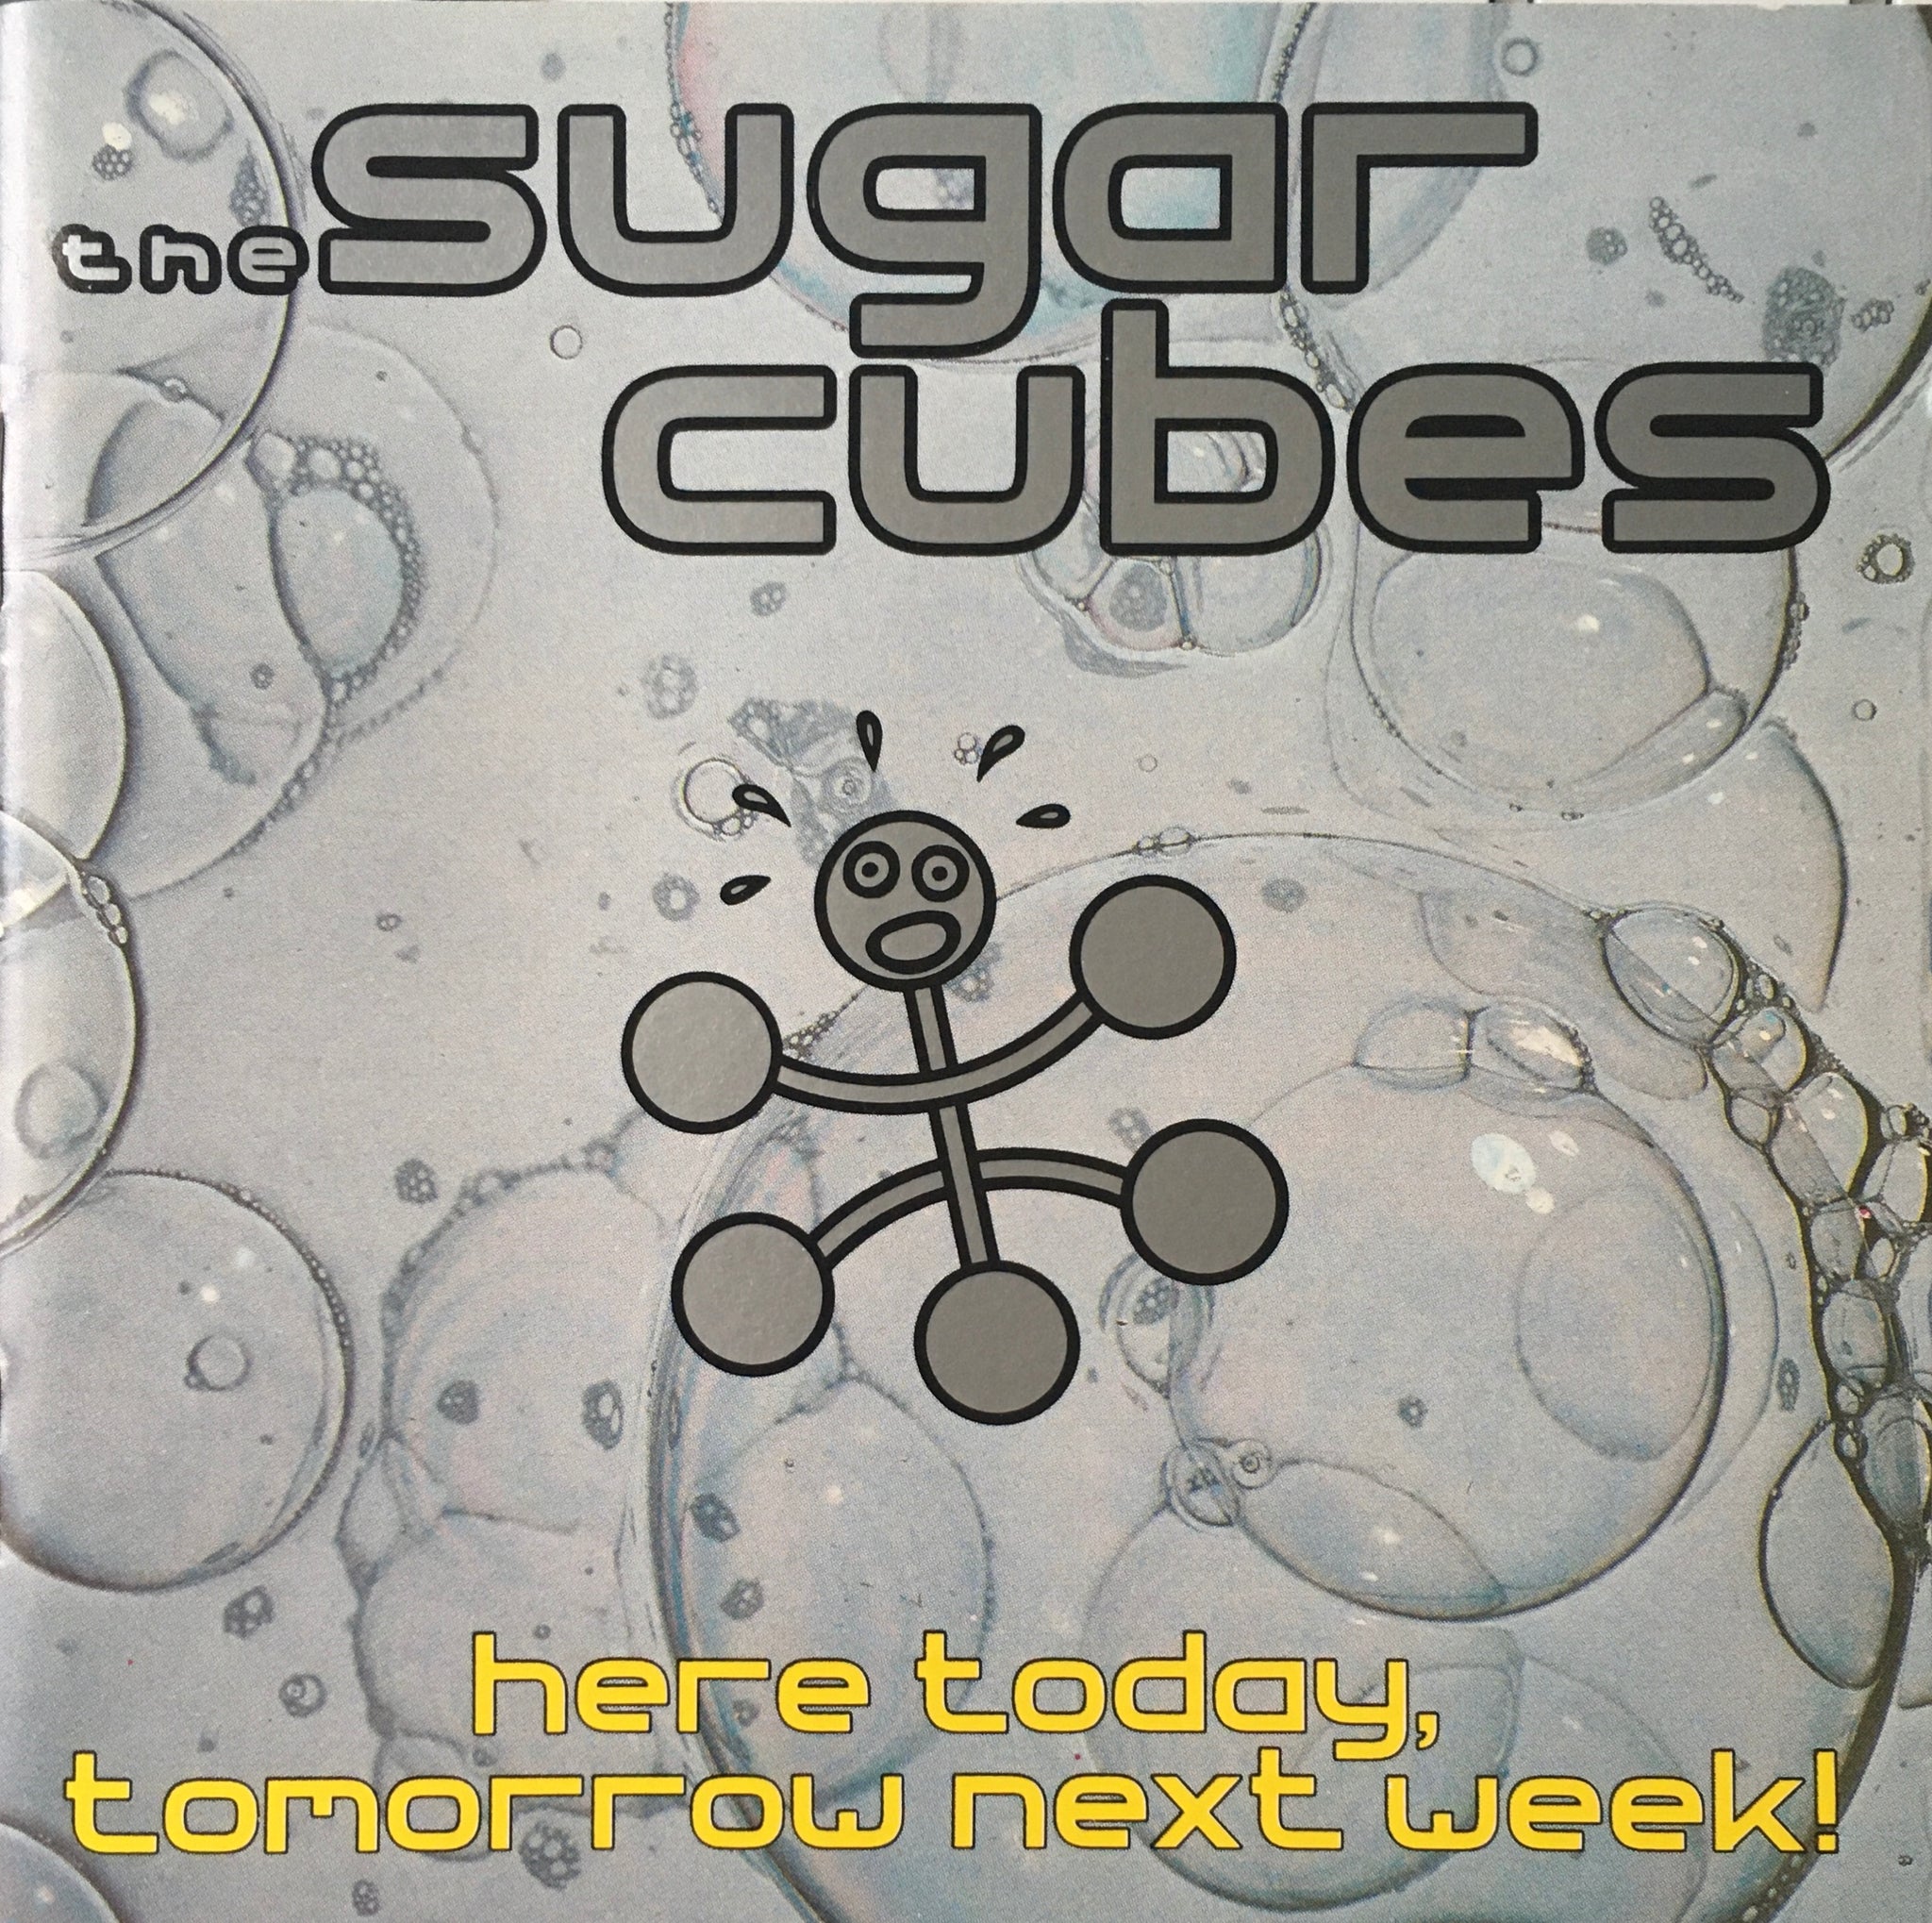 The Sugarcubes "Here Today, Tomorrow Next Week!" CD (1989)